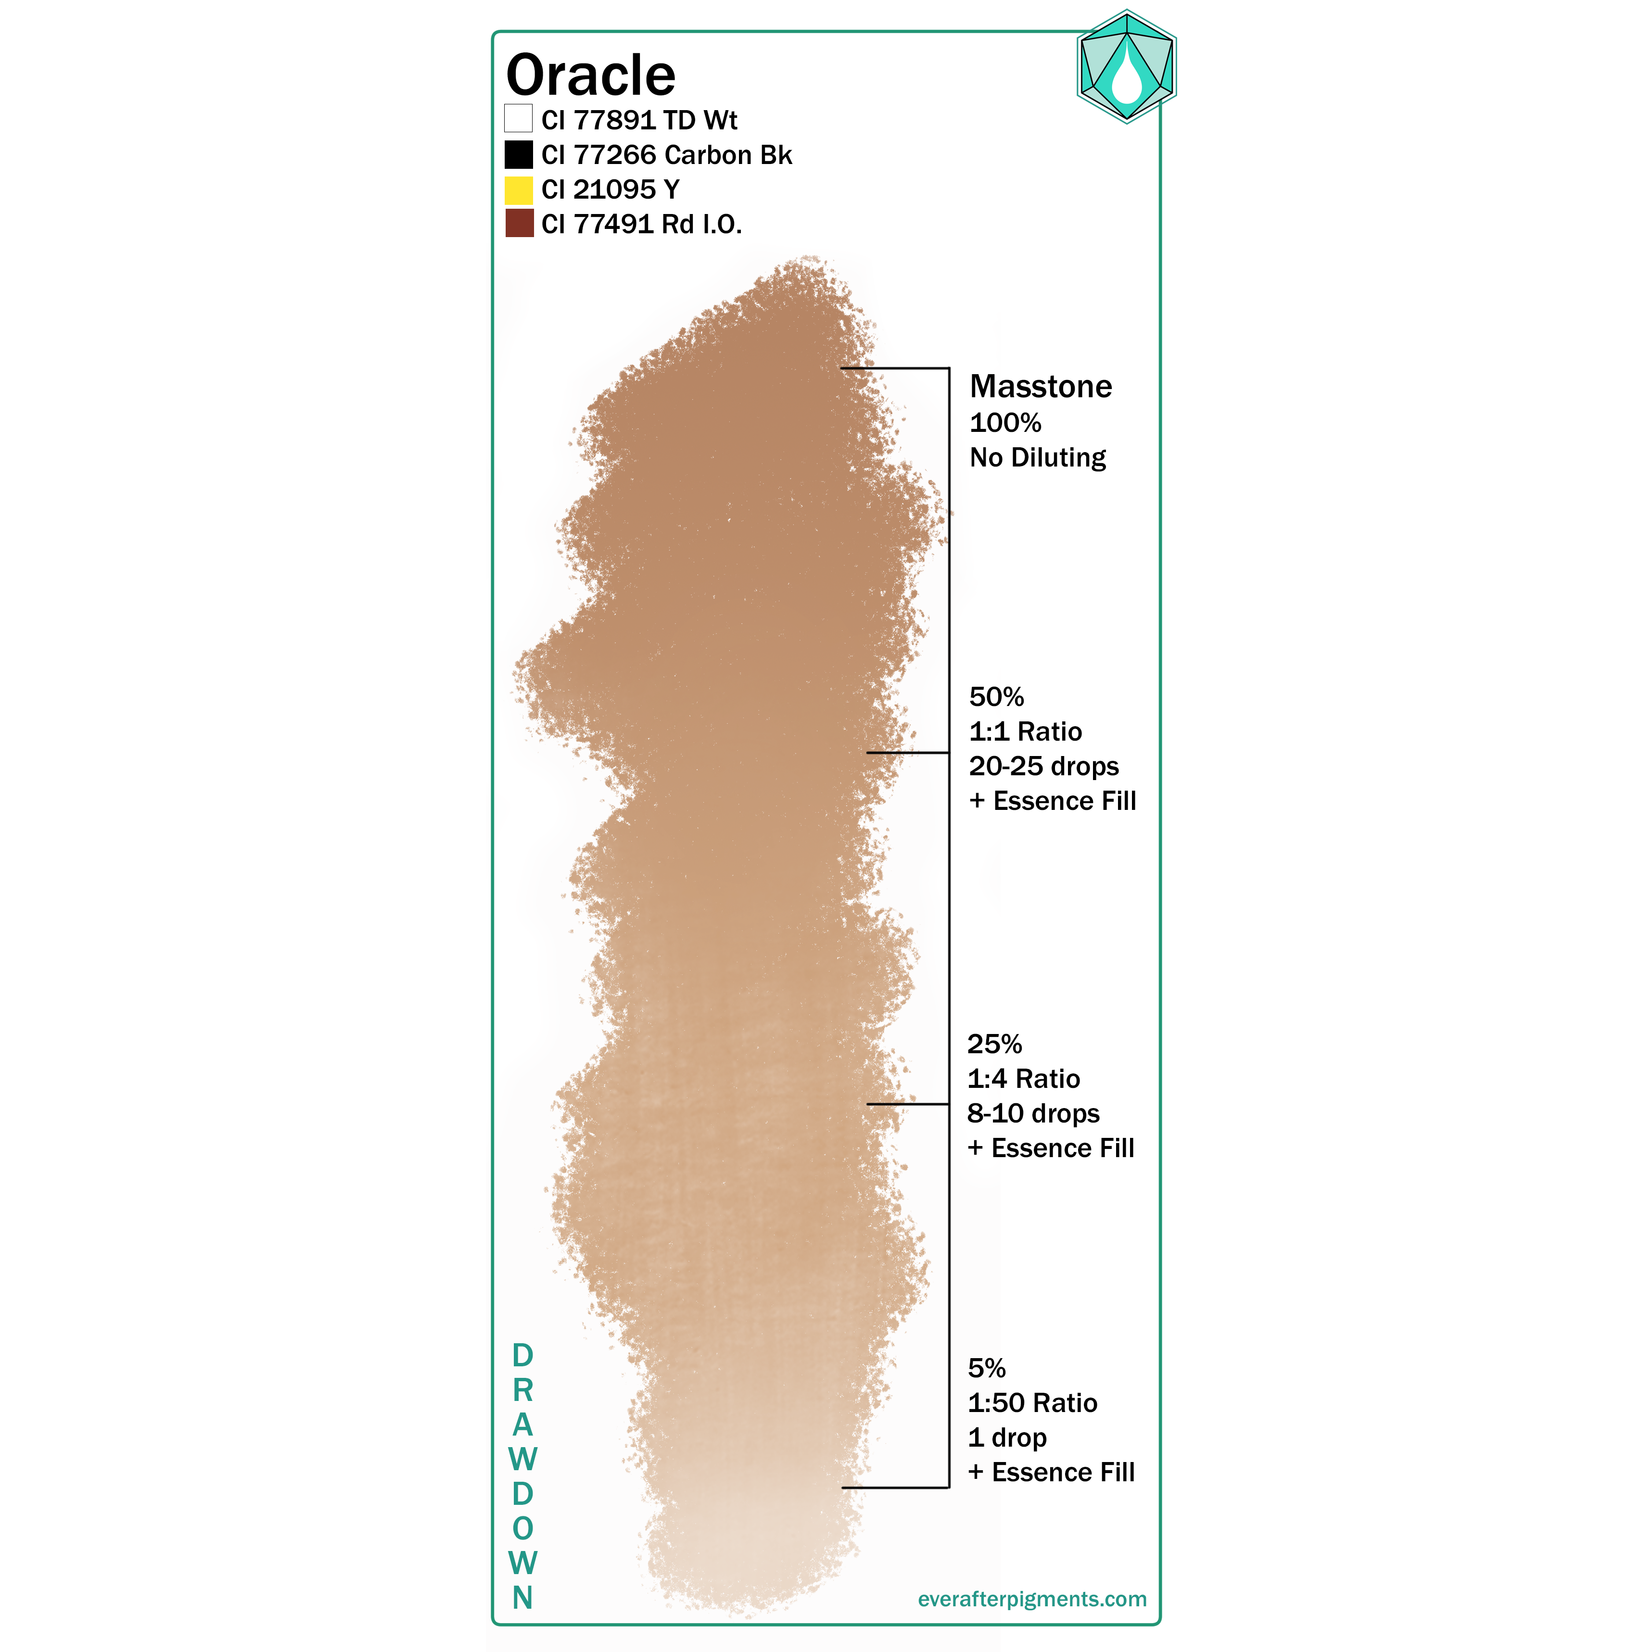 EVER AFTER PIGMENTS ORACLE 0.5OZ